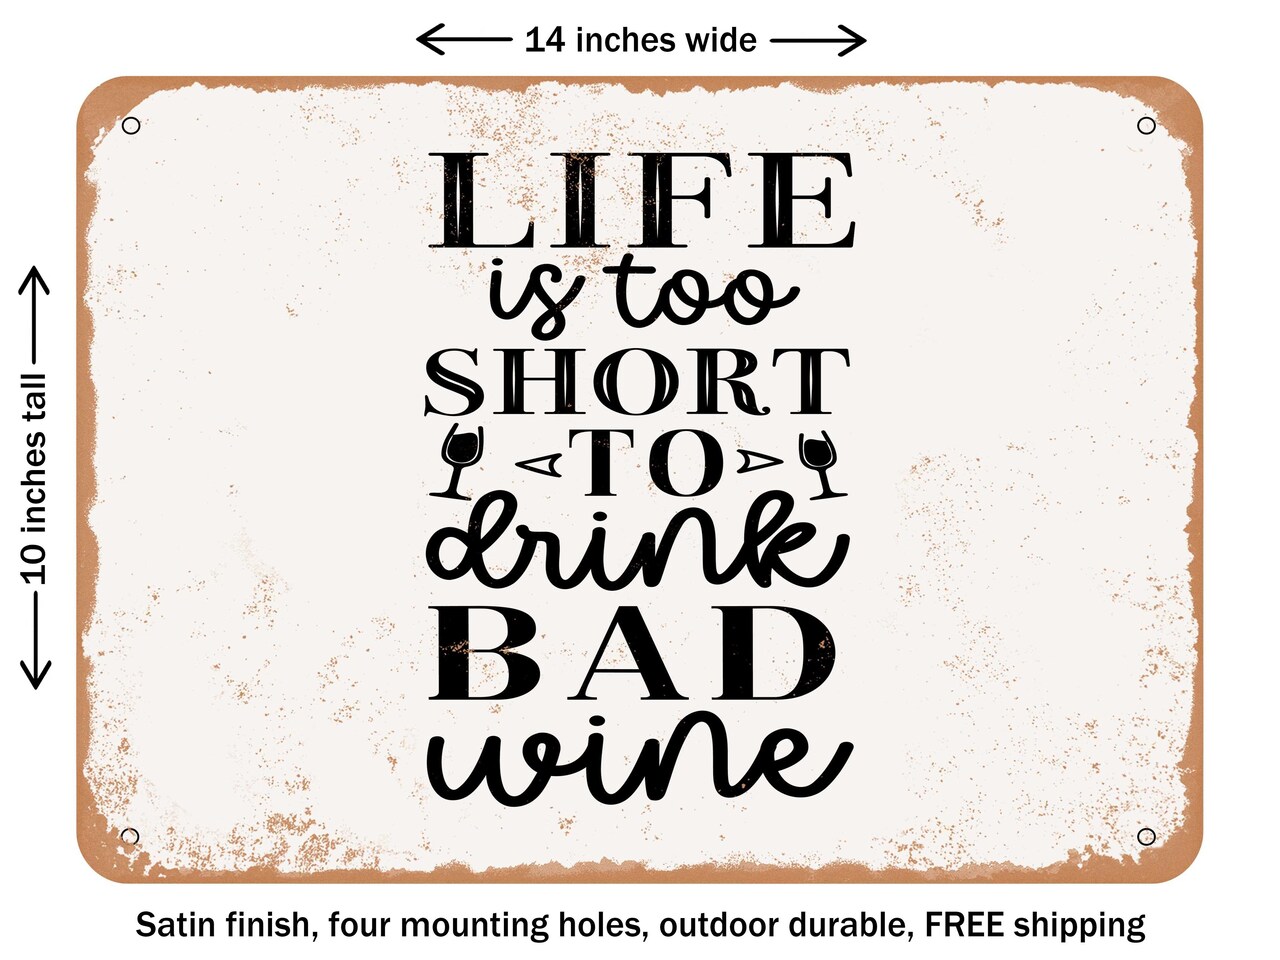 DECORATIVE METAL SIGN - Life is too Short to Drink Bad Wine - Vintage Rusty Look